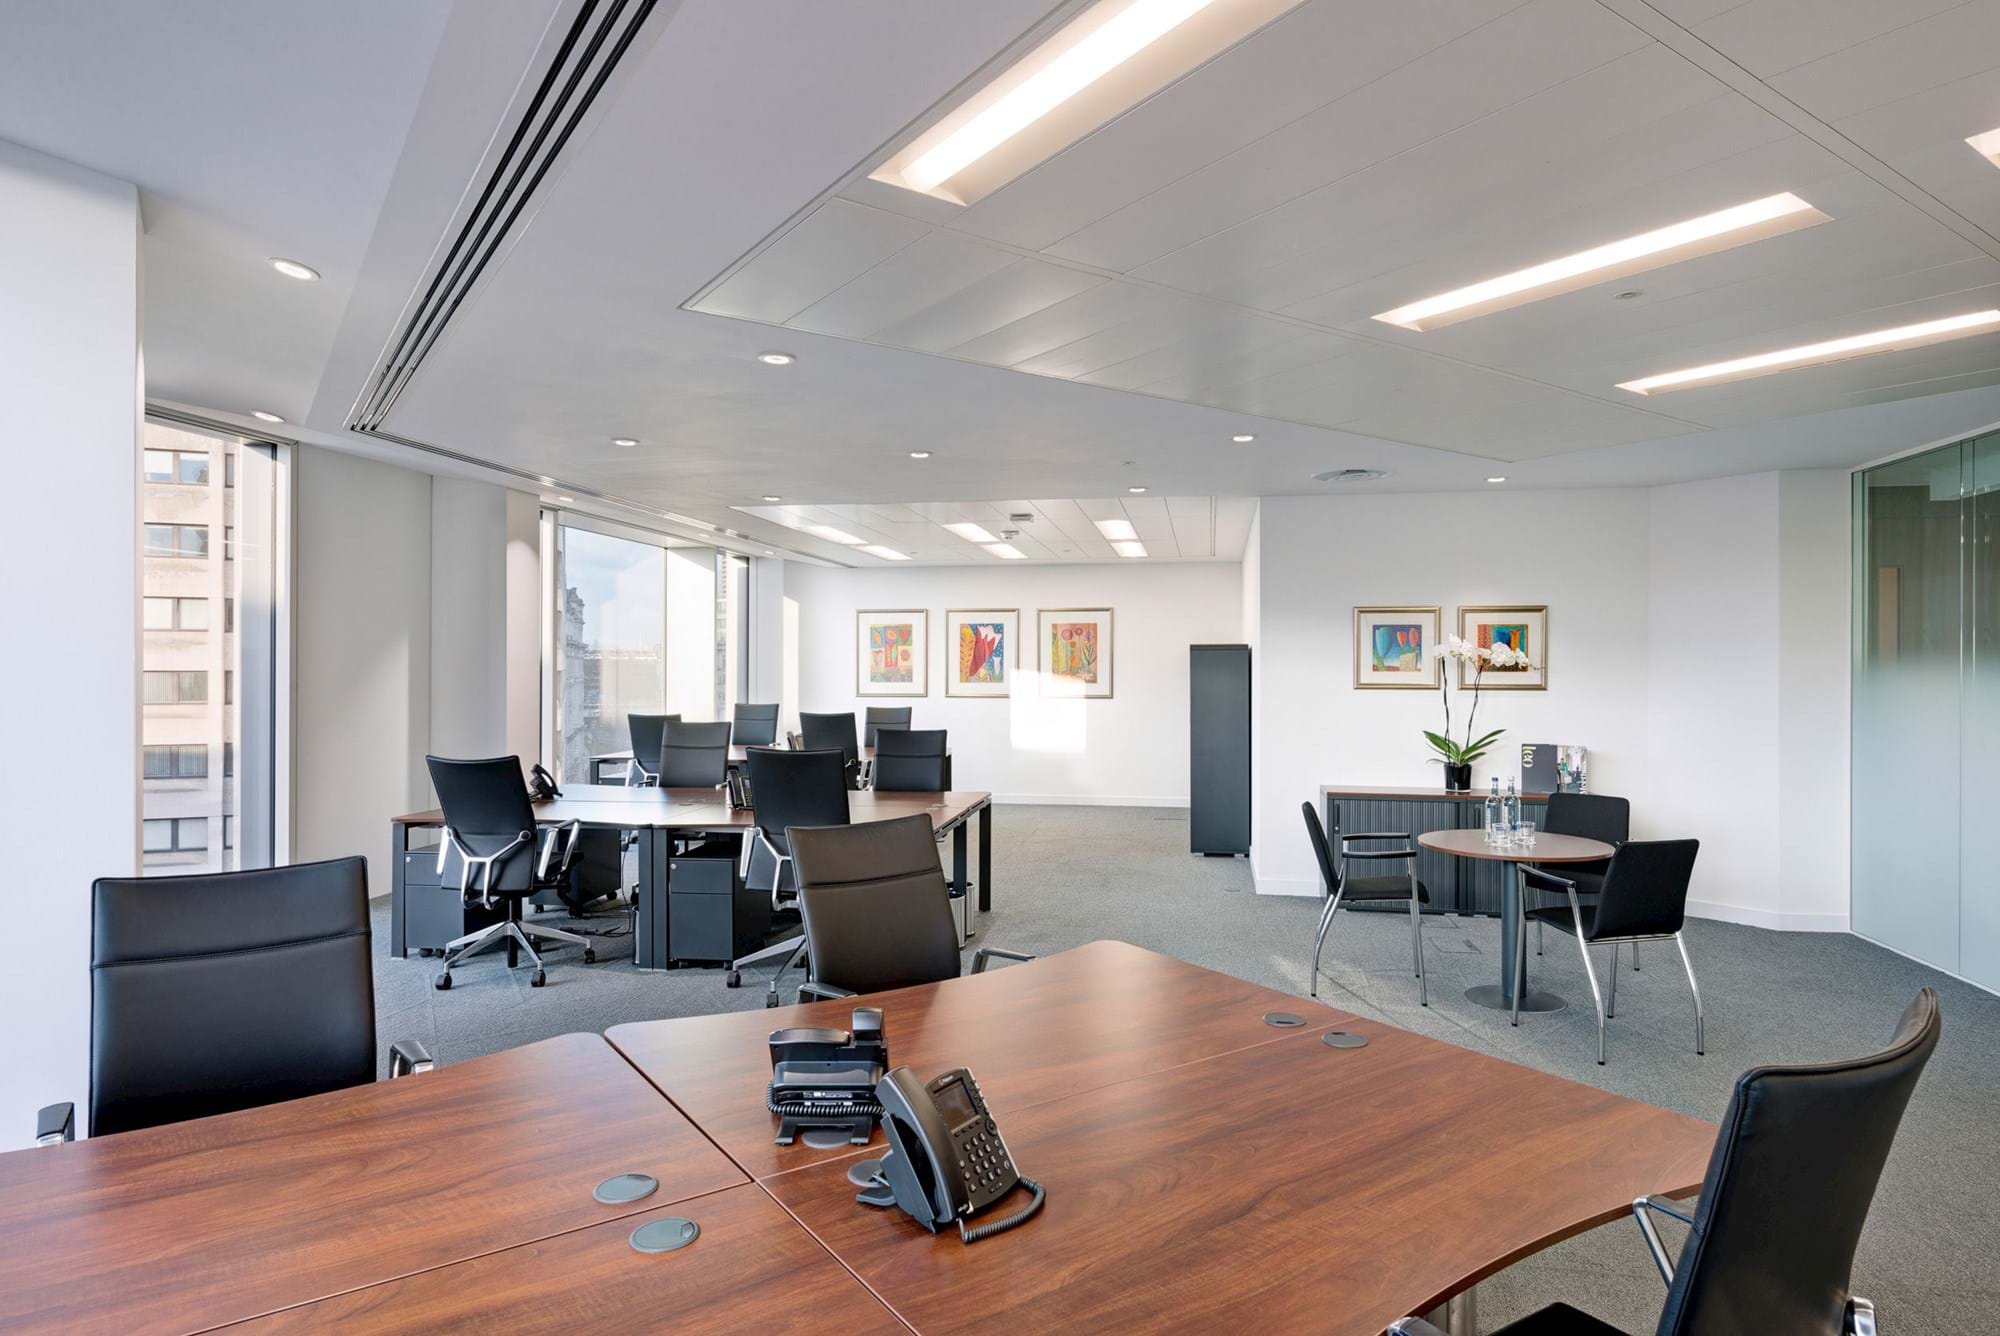 Modus Workspace office design, fit out and refurbishment - LEO - St Pauls - LEO St Pauls 10 highres sRGB.jpg